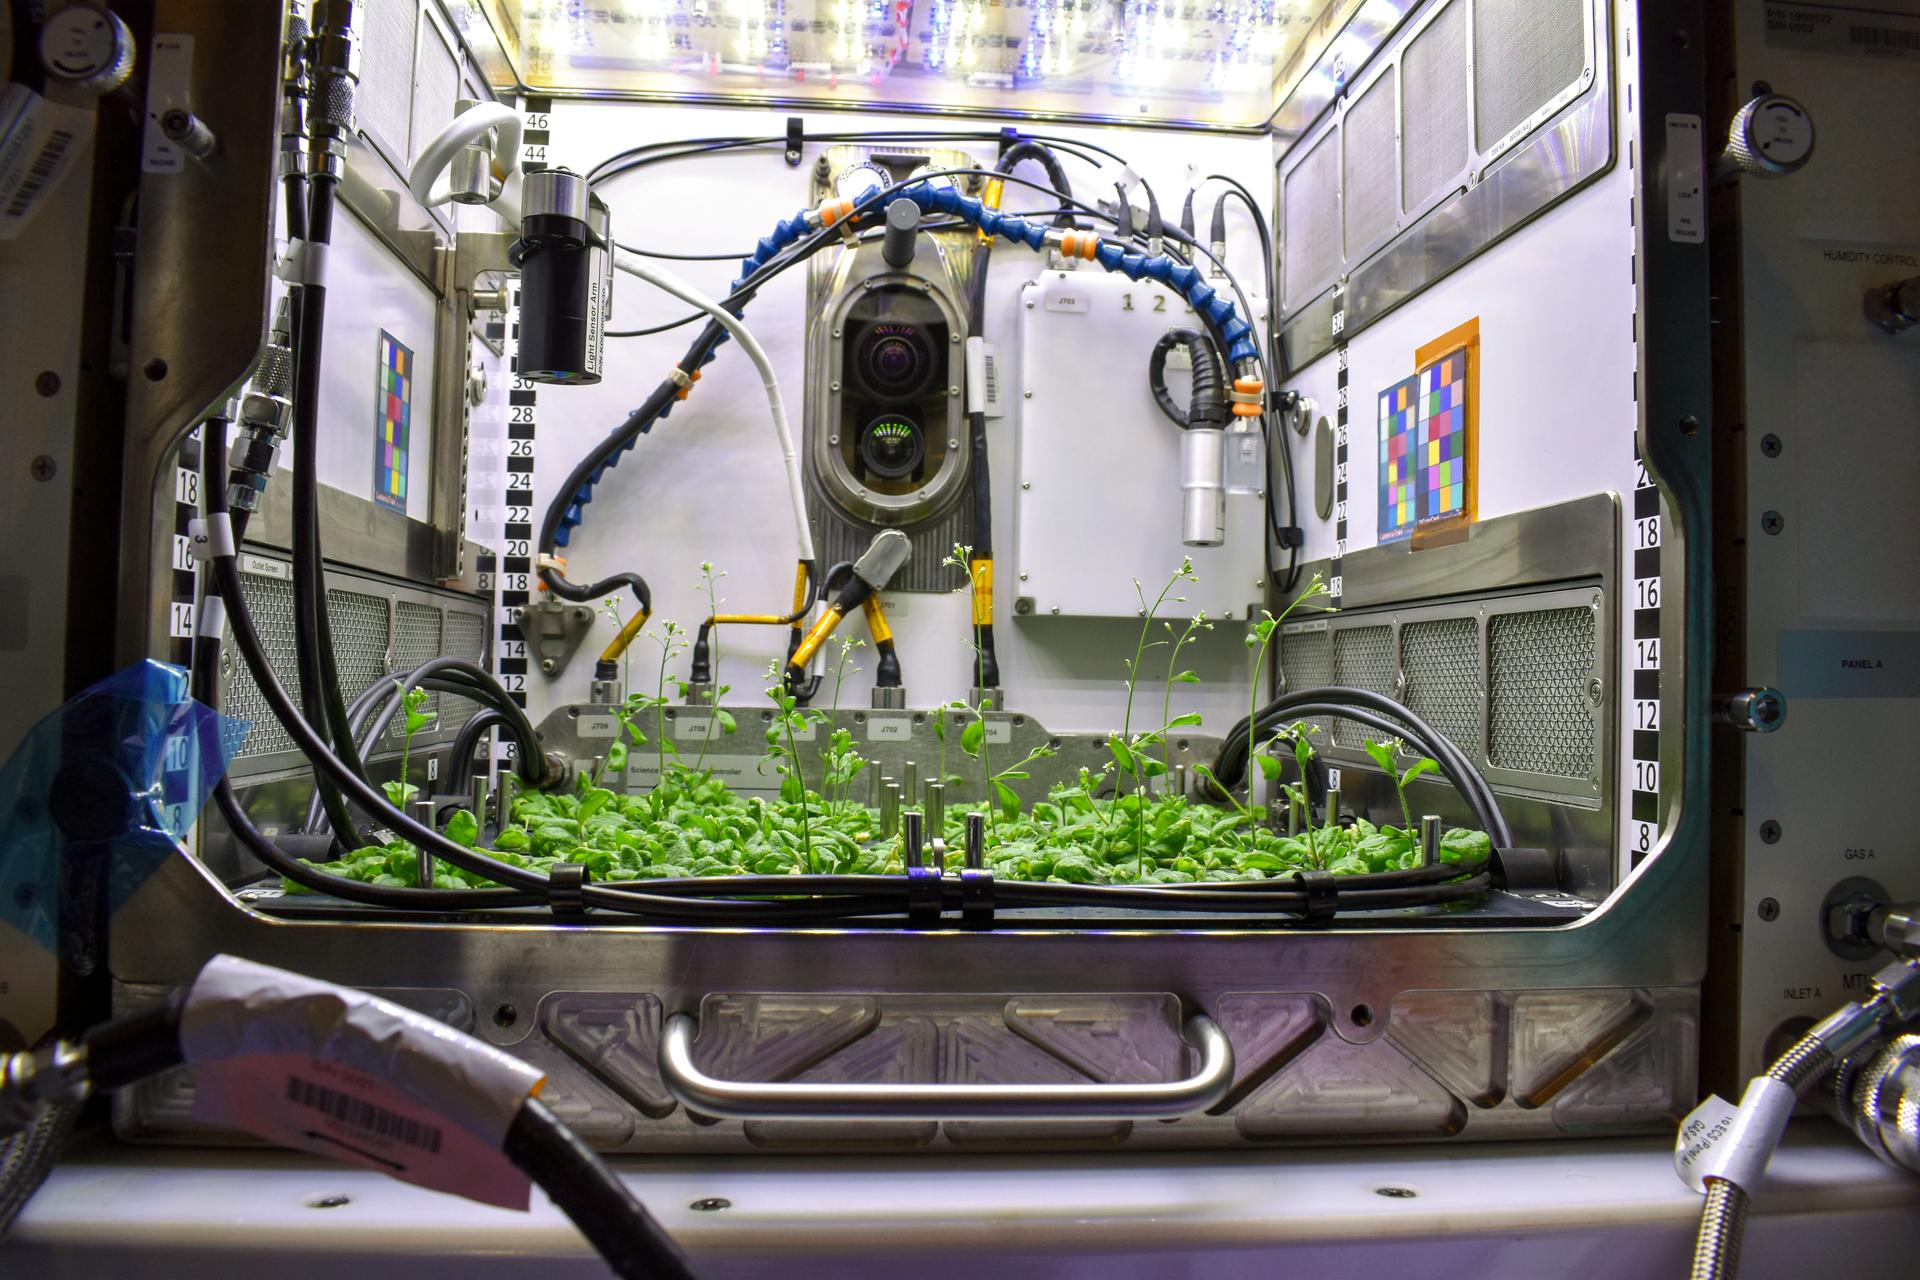 A view into NASA's Kennedy Space Center’s Advanced Plant Habitat (APH) during experiment verification testing for the Plant Habitat-03 investigation. The image shows the Arabidopsis plants growing in the APH just before the four seed bags are installed.